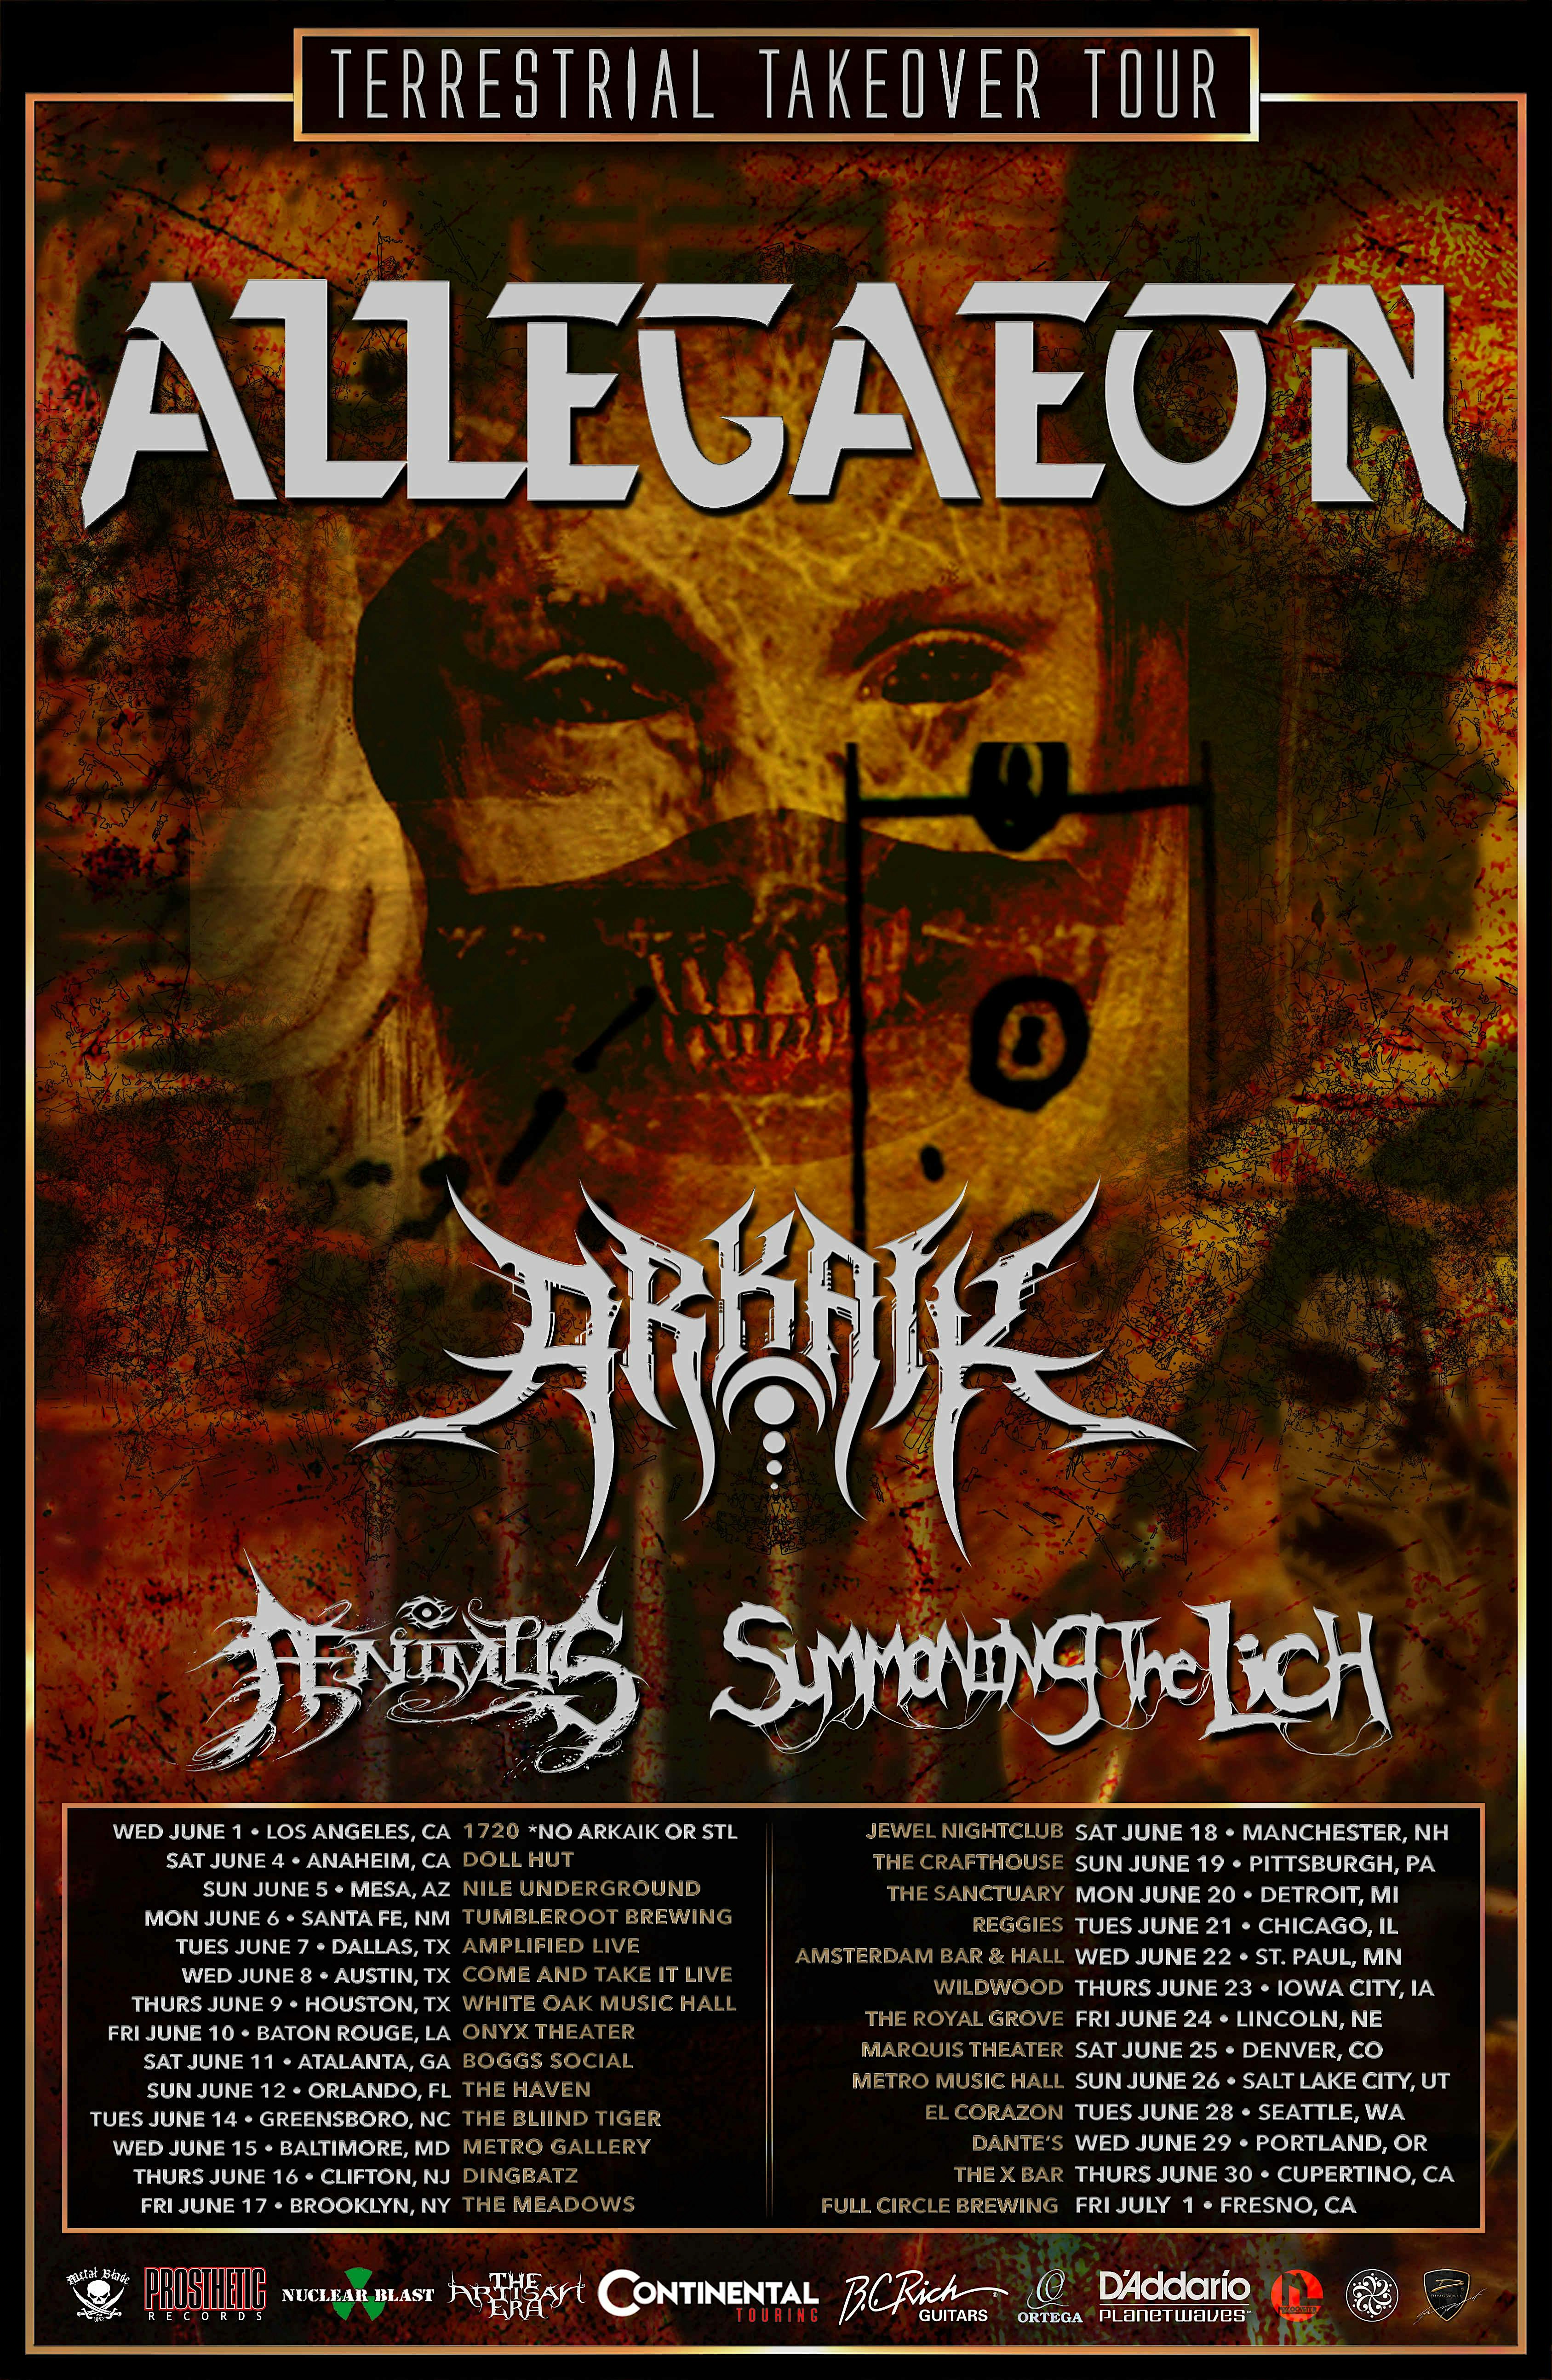 Allegaeon, Arkaik, Aenimus, and Summoning the Lich in Orlando at the Haven